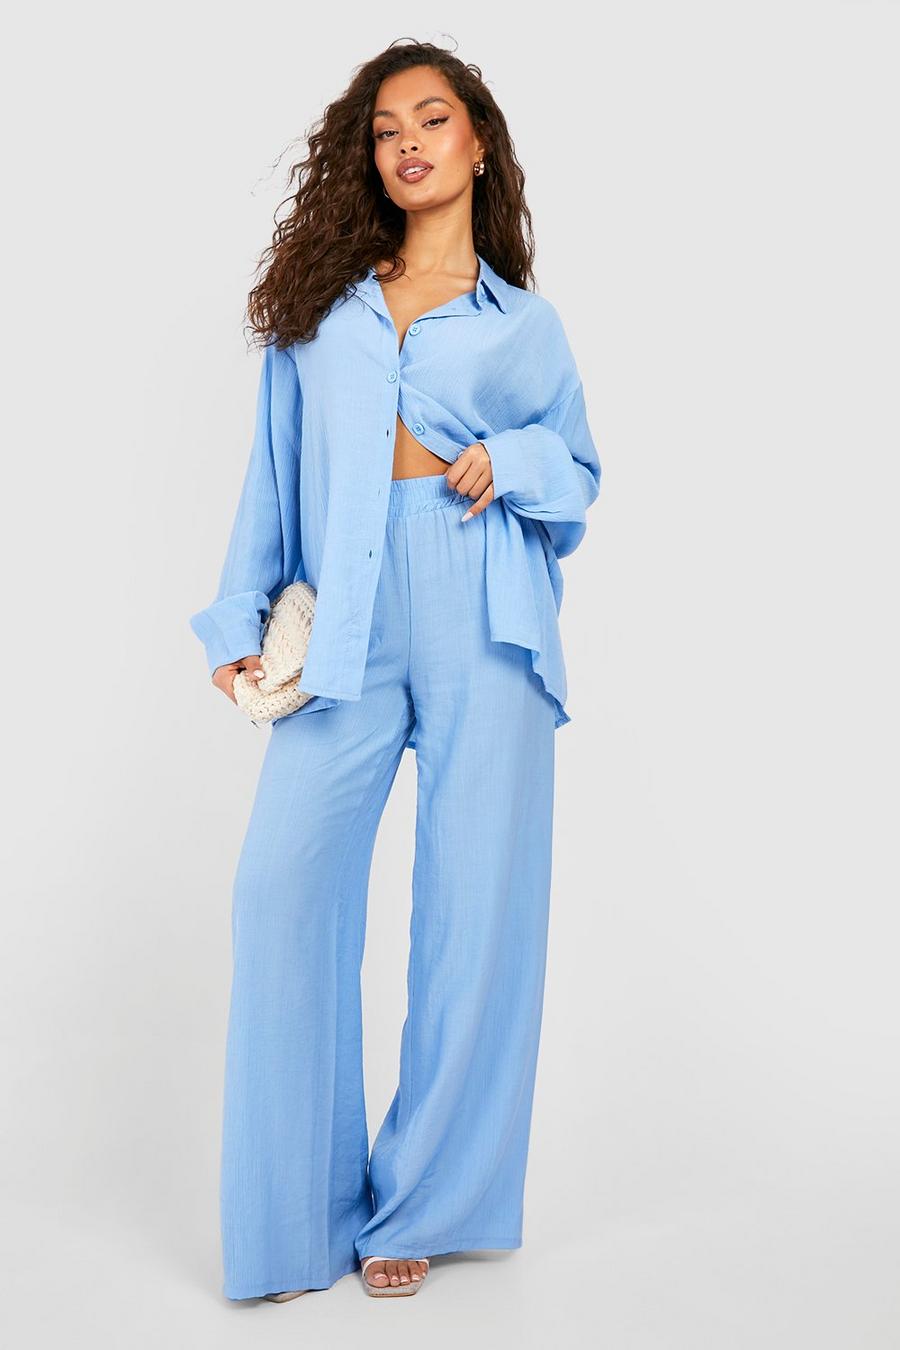 Sky blue Crinkle Relaxed Fit Wide Leg Pants